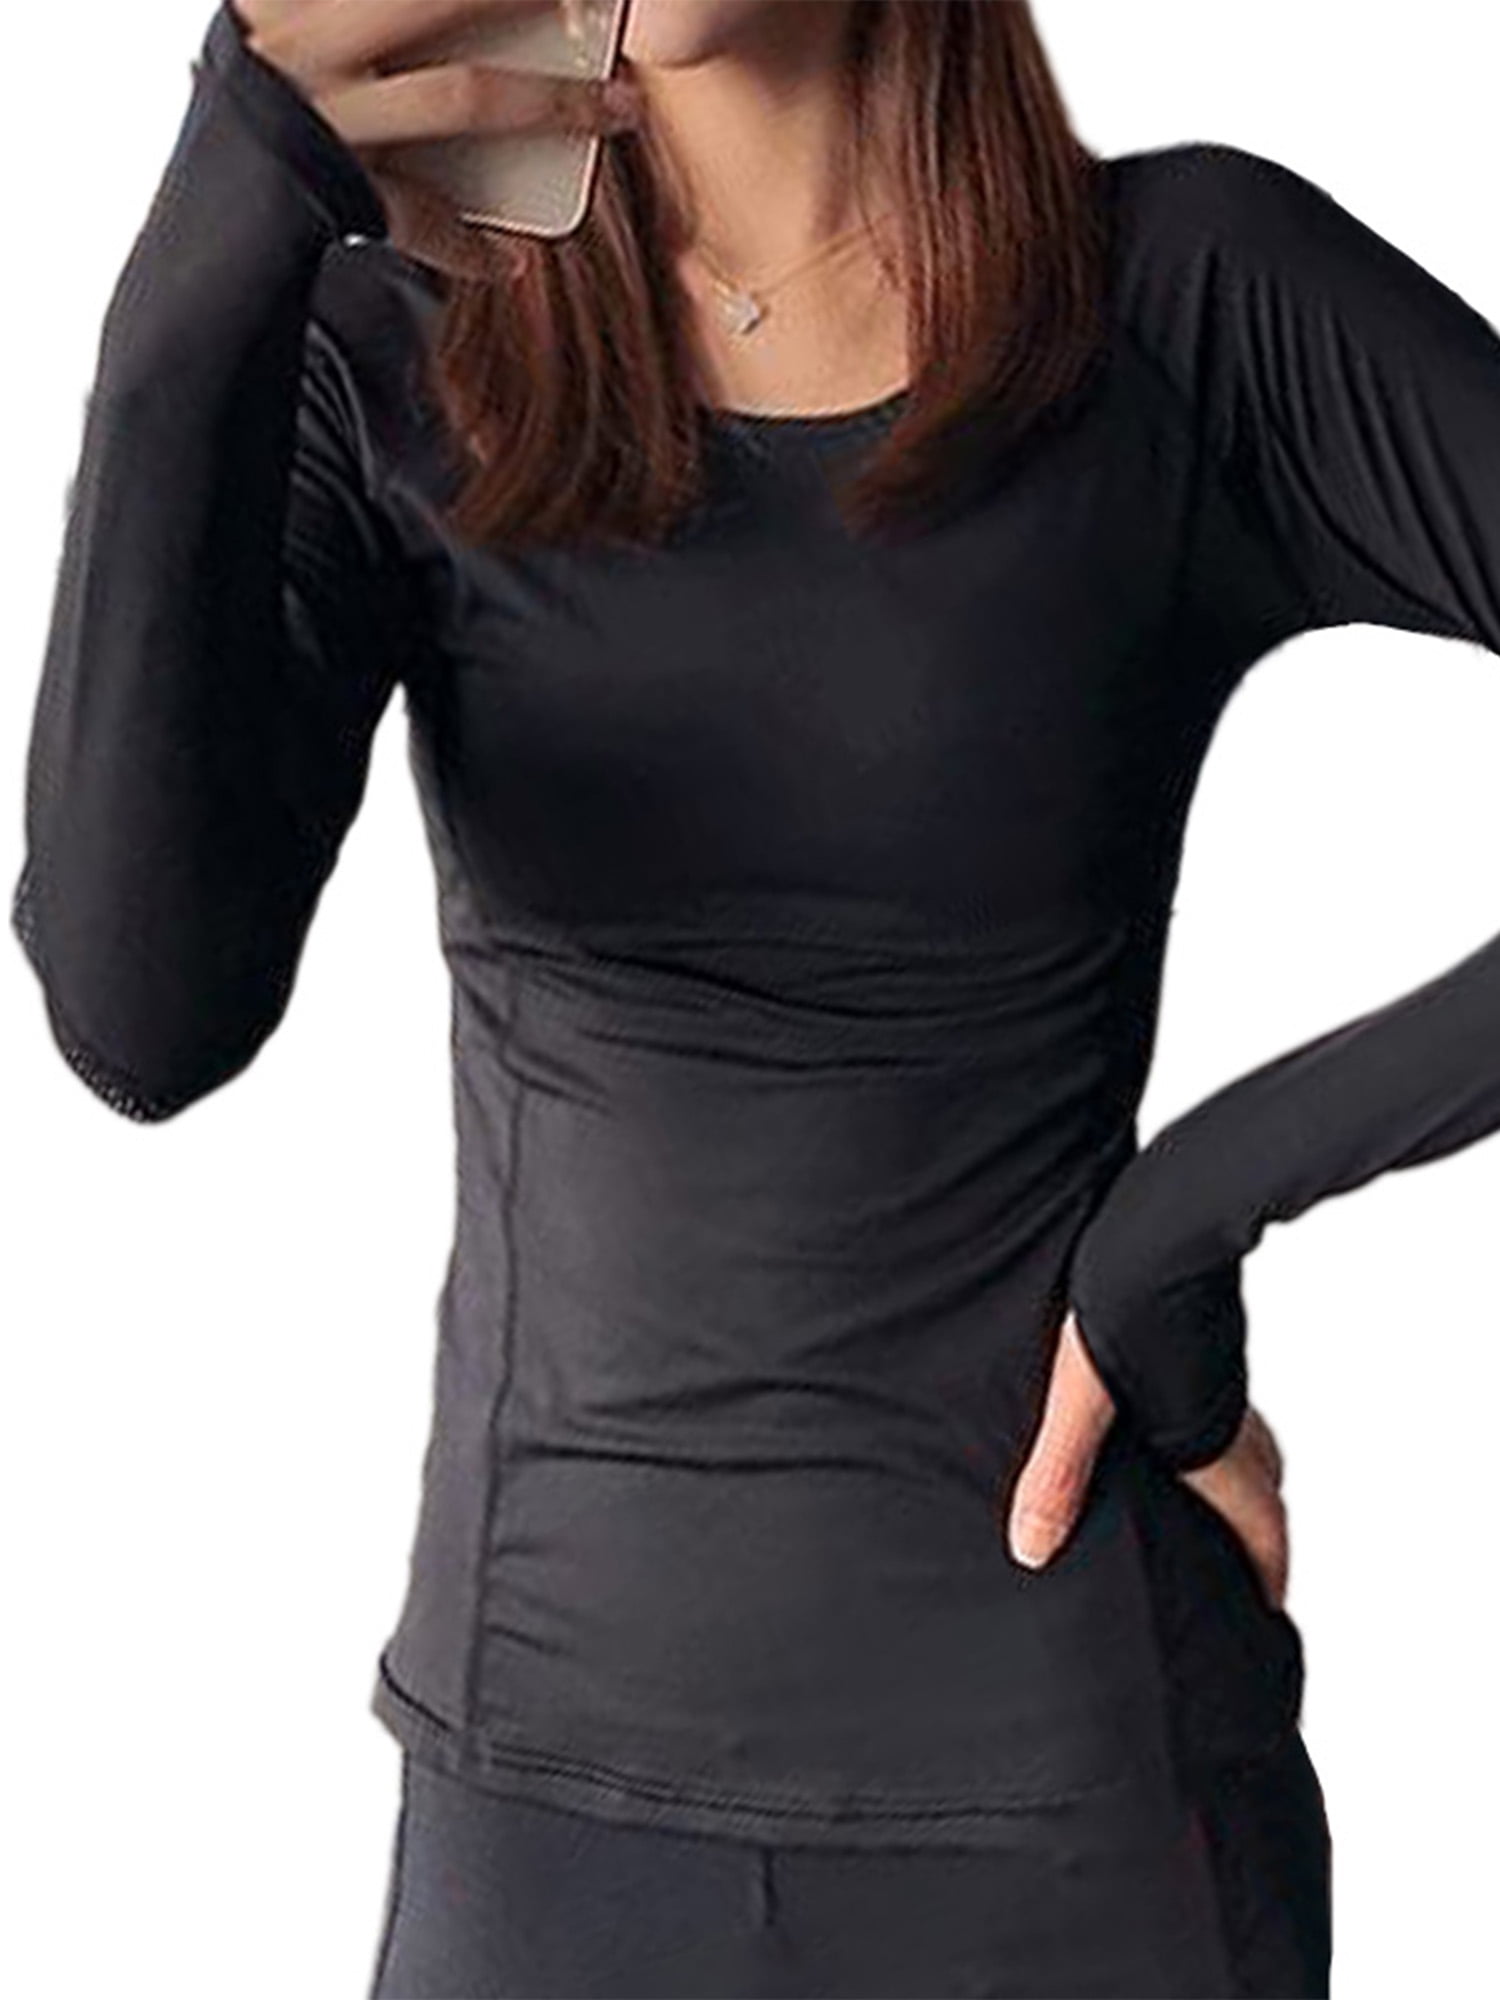 Stretch Long Sleeve Yoga Shirts Workout Activewear Tops Stretch